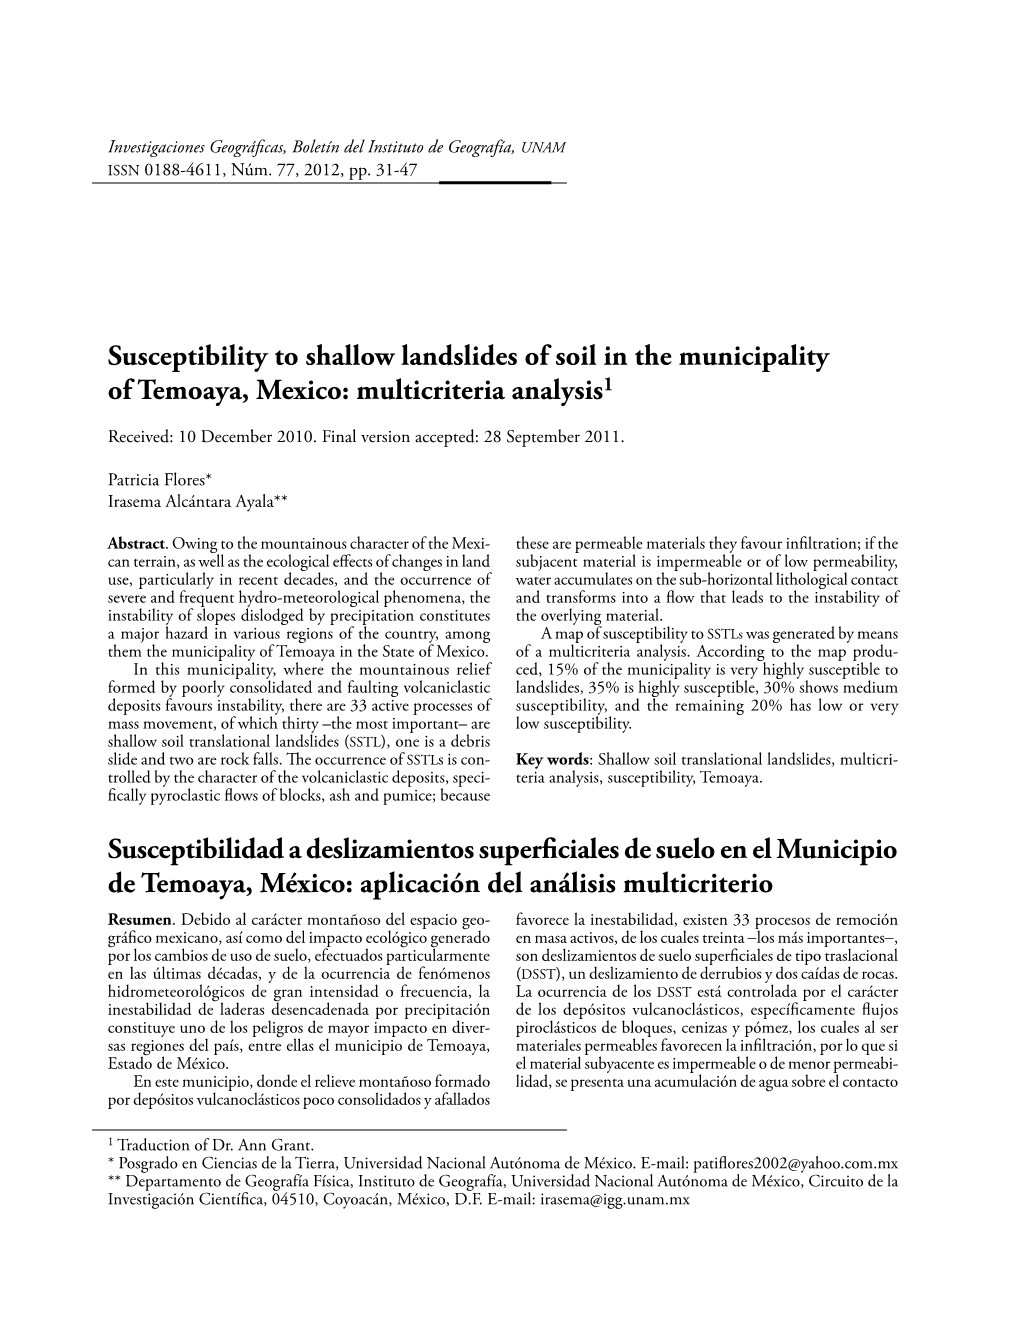 Susceptibility to Shallow Landslides of Soil in the Municipality of Temoaya, Mexico: Multicriteria Analysis1